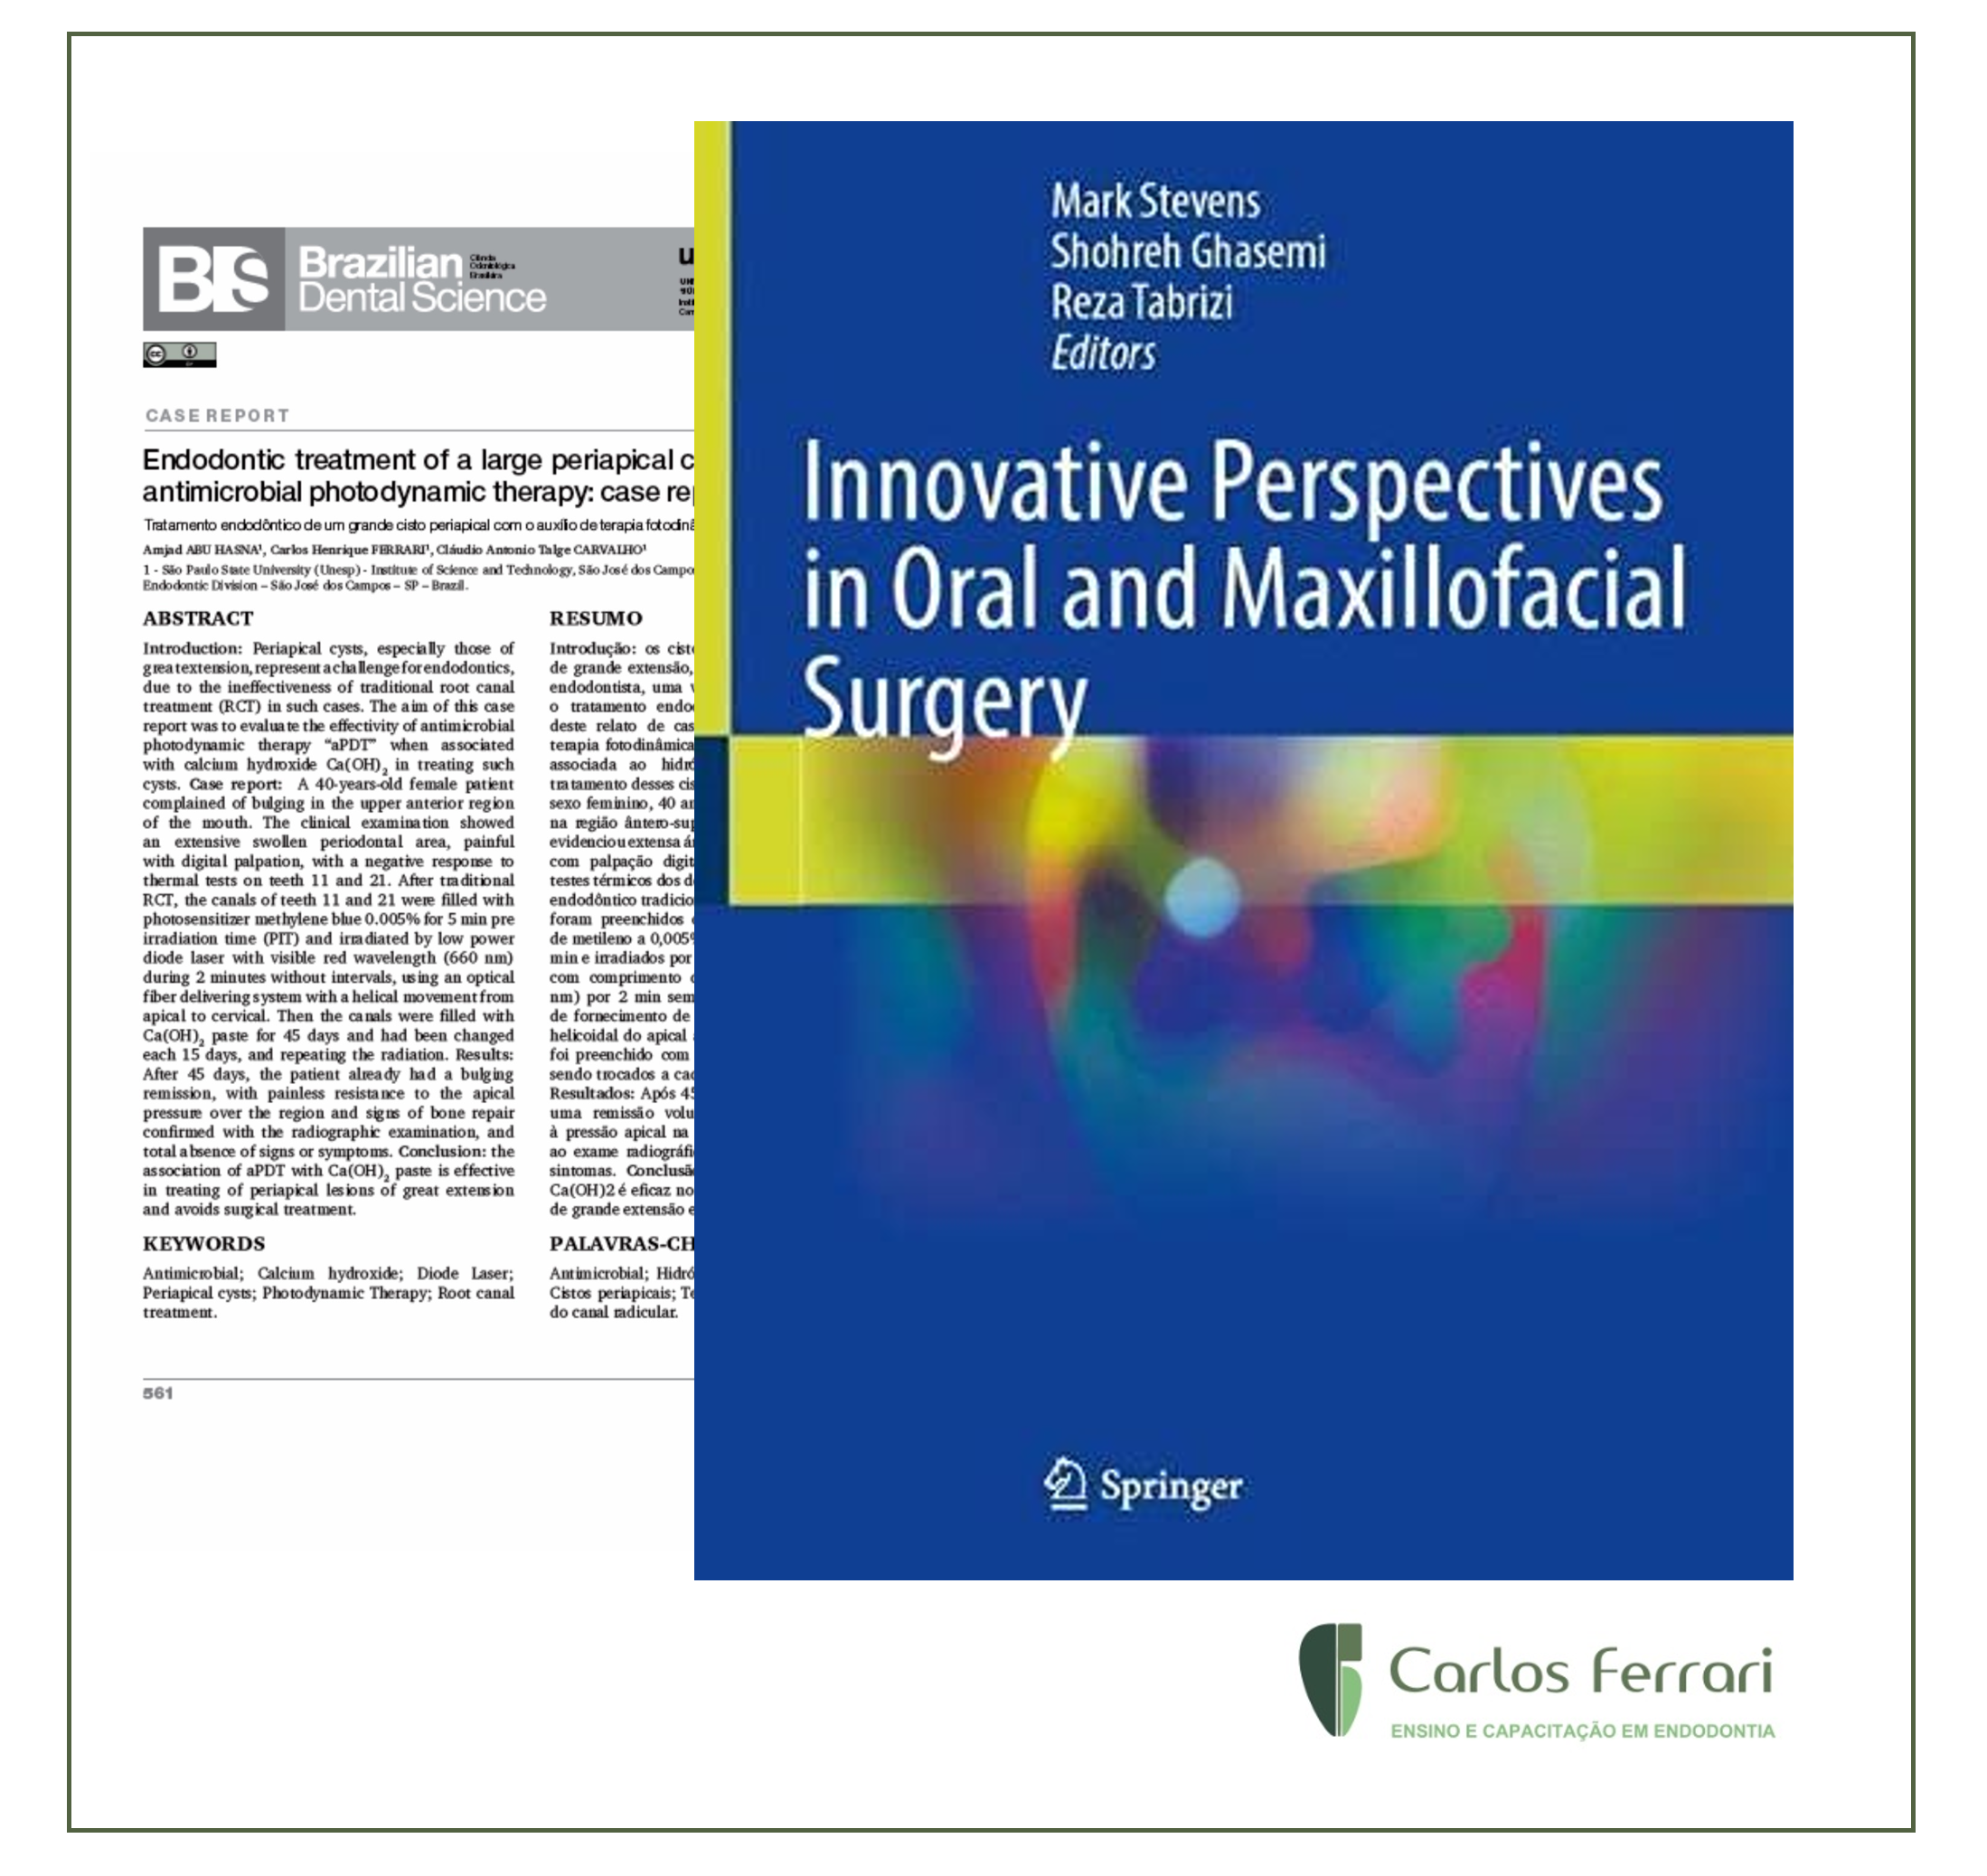 You are currently viewing Article cited in the book "Innovative Perspectives in Oral and Maxillofacial Surgery